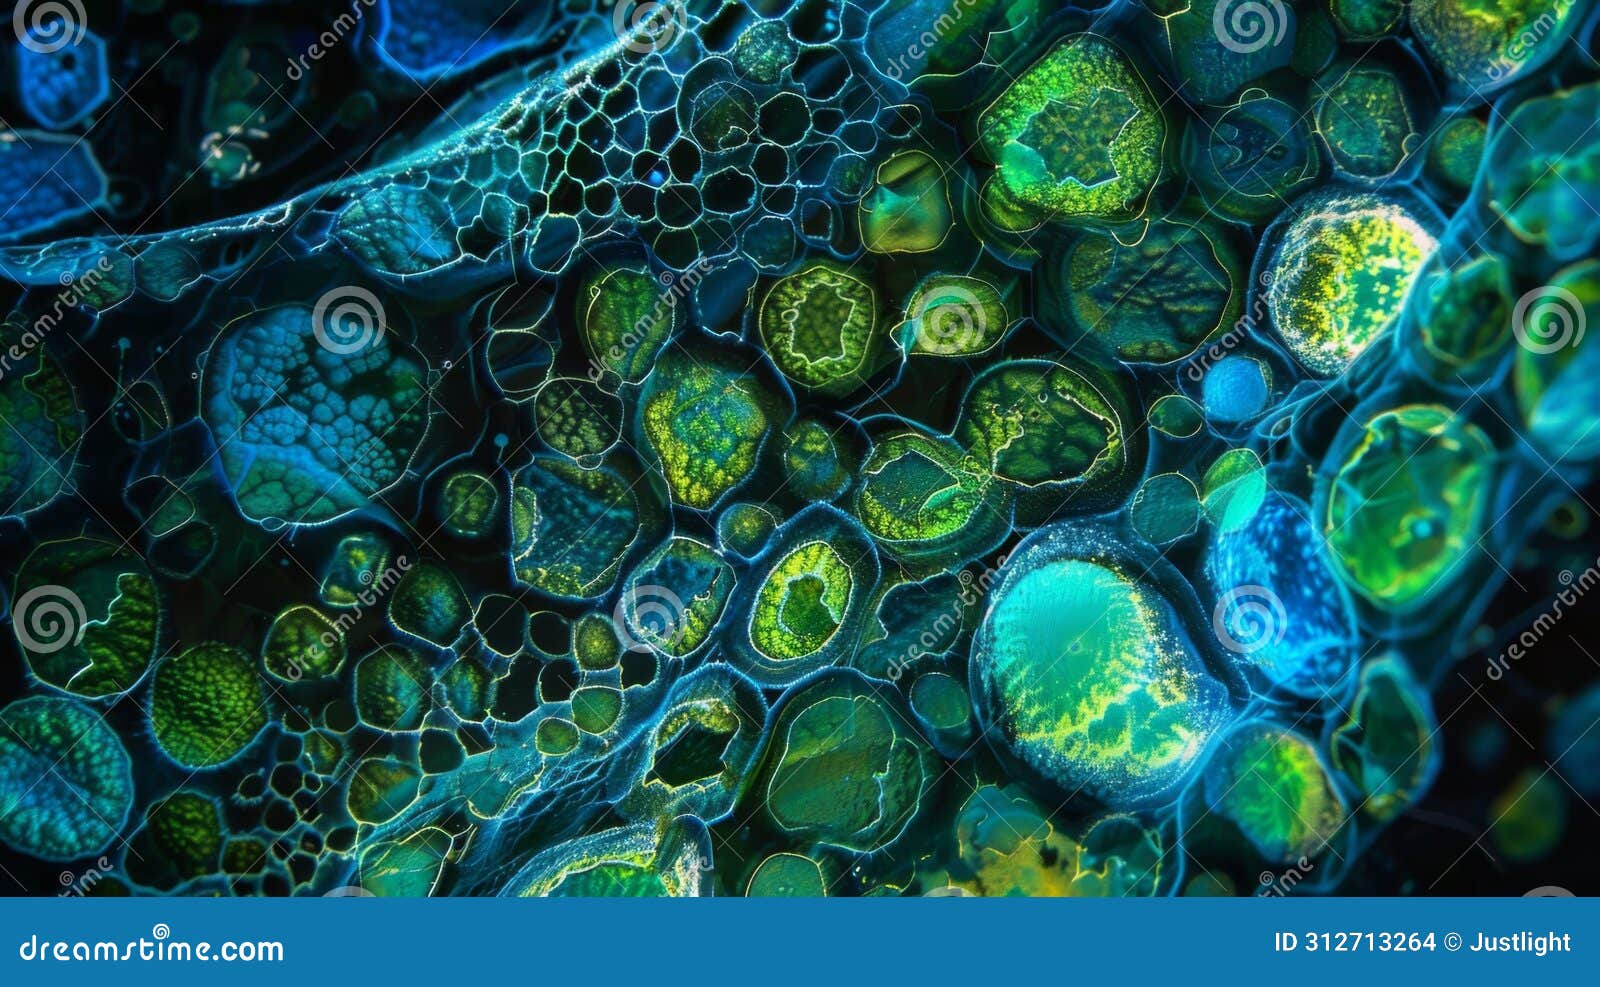 a closeup view of a single algal cell showcasing the radiant shades of blue and green in its chloroplasts. .